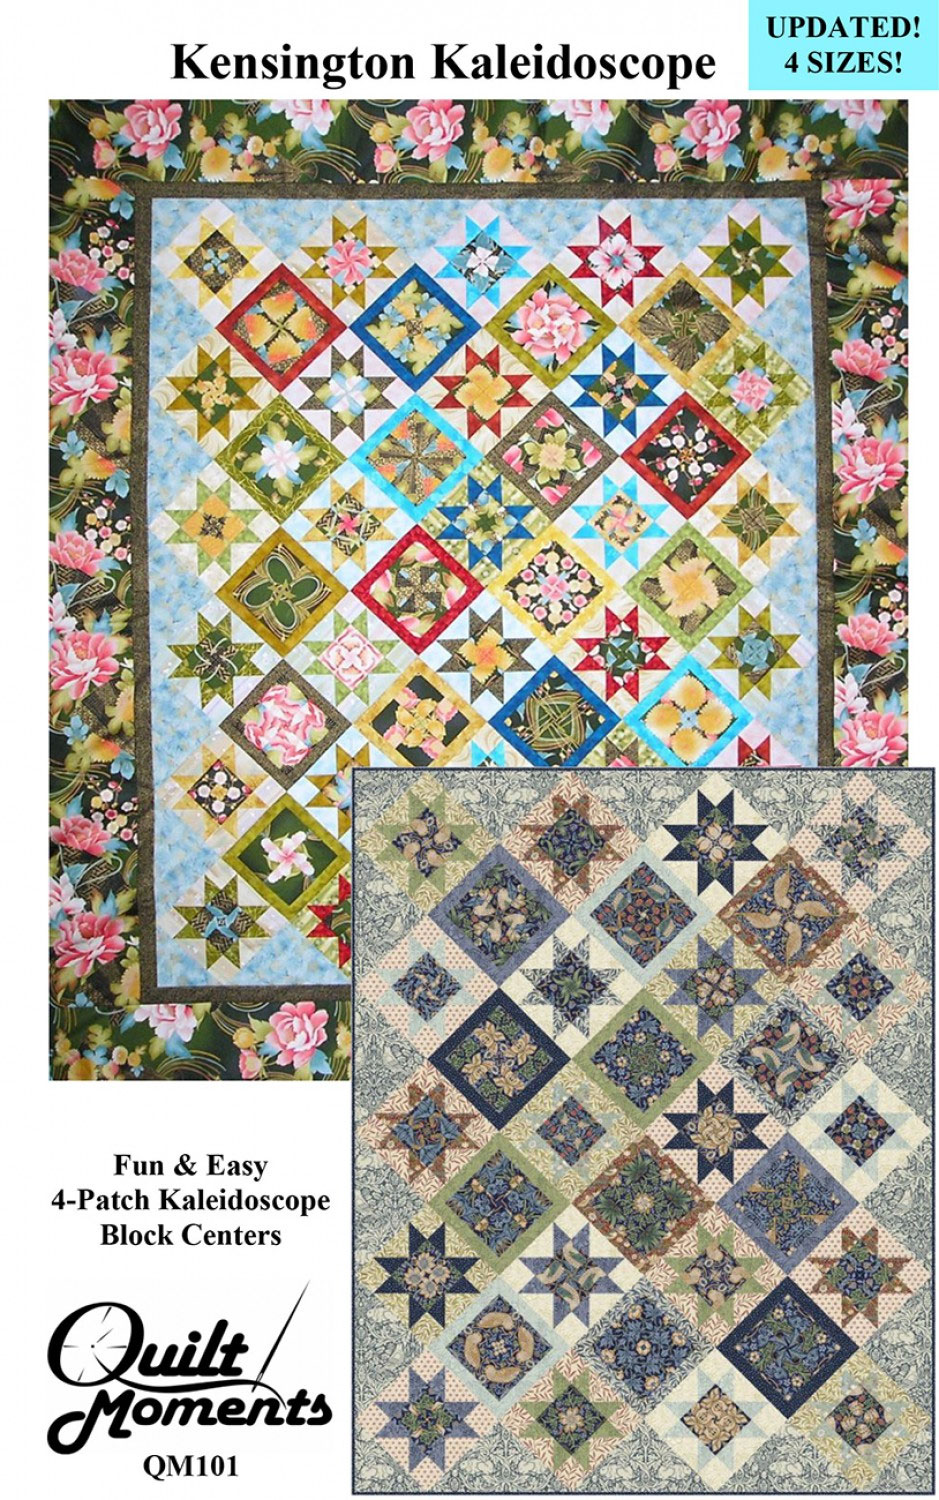 Kensington-Kaleidoscope-sewing-pattern-Marilyn-Foreman-Quilt-Moments-front